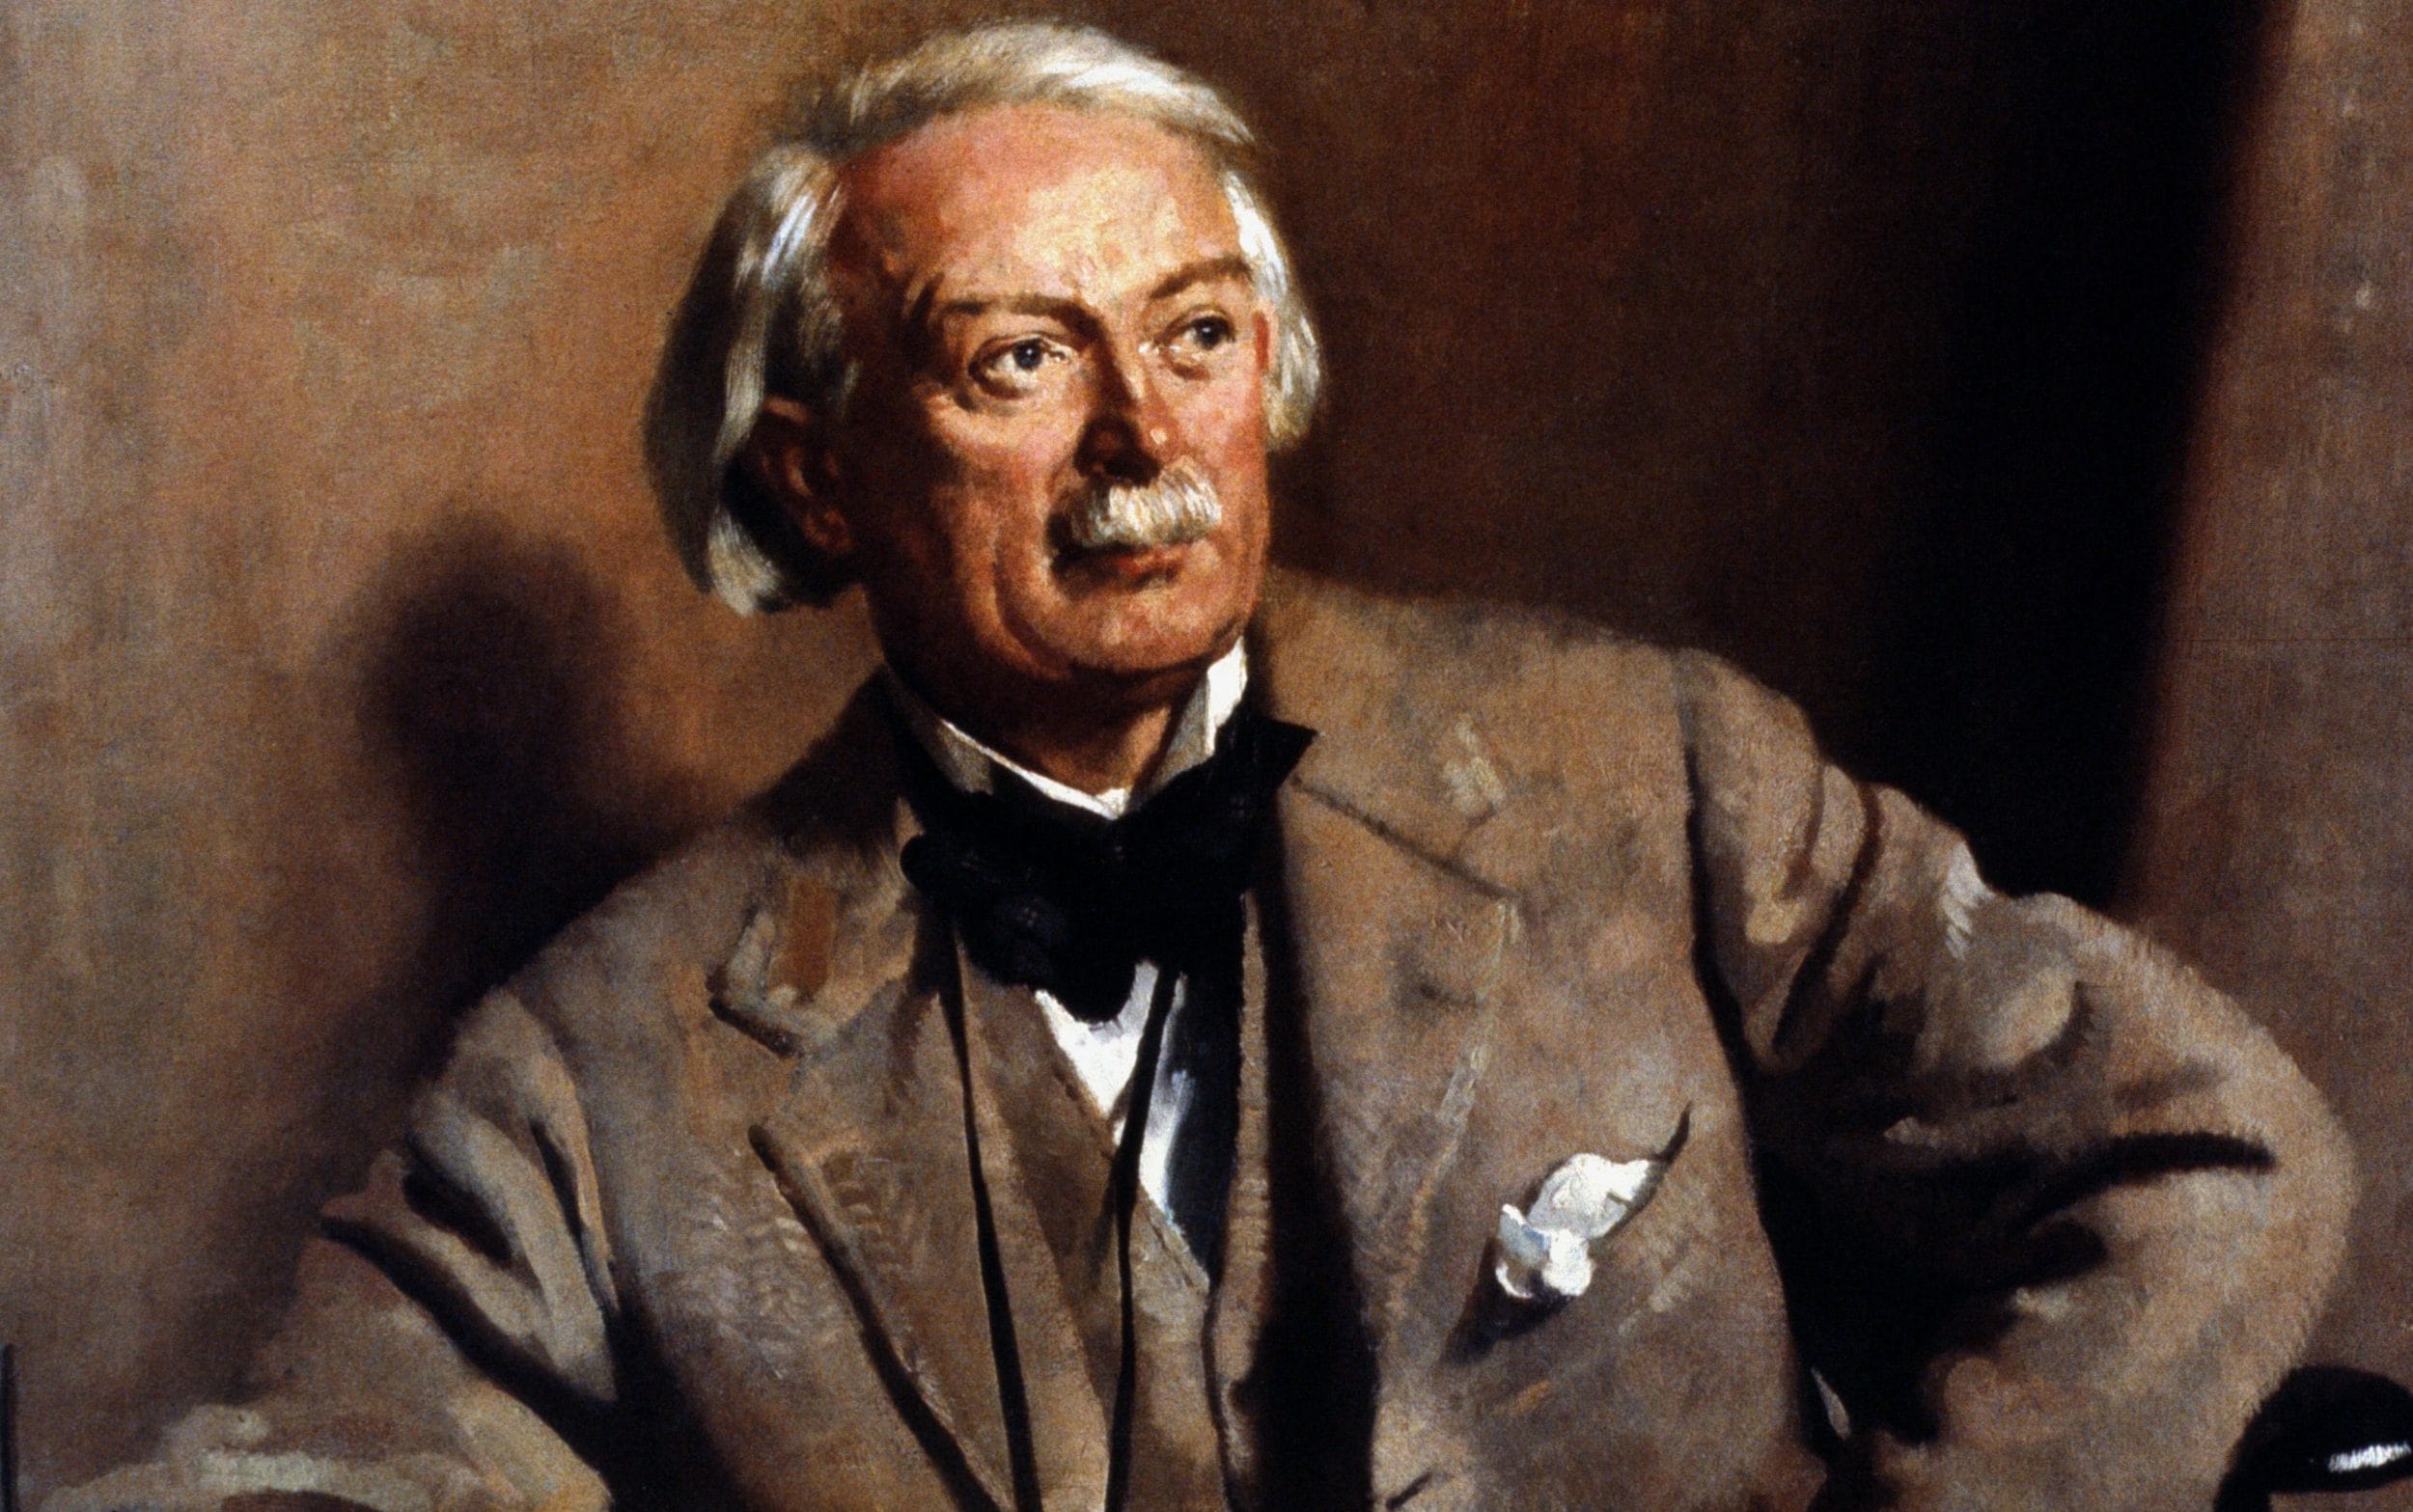 why do historians keep trying to save lloyd george’s reputation?